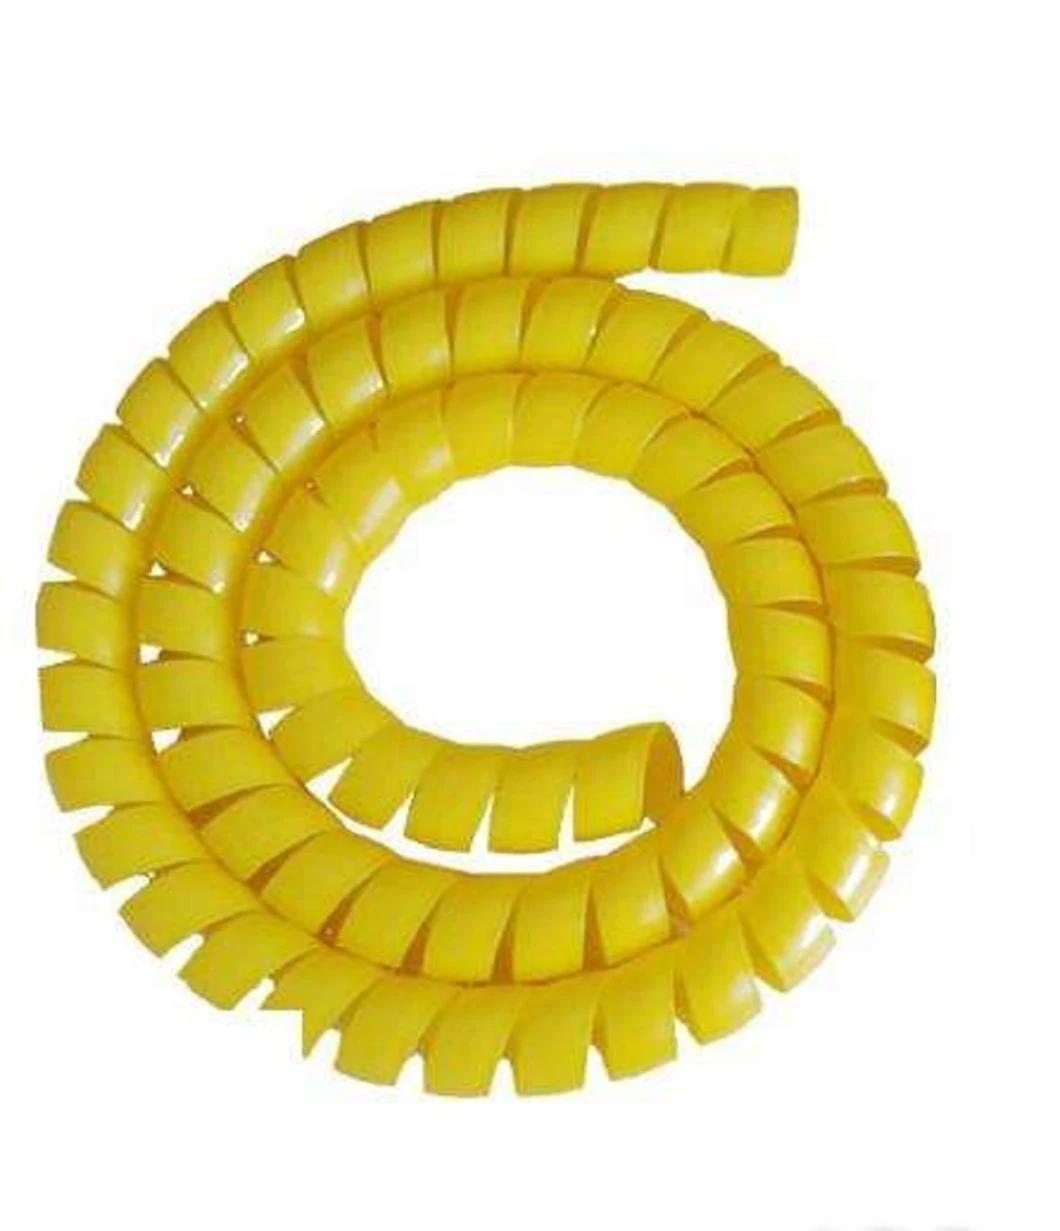 Rubber Hose Sheathing PP Spiral Protective Cover Hydraulic Hose Guard